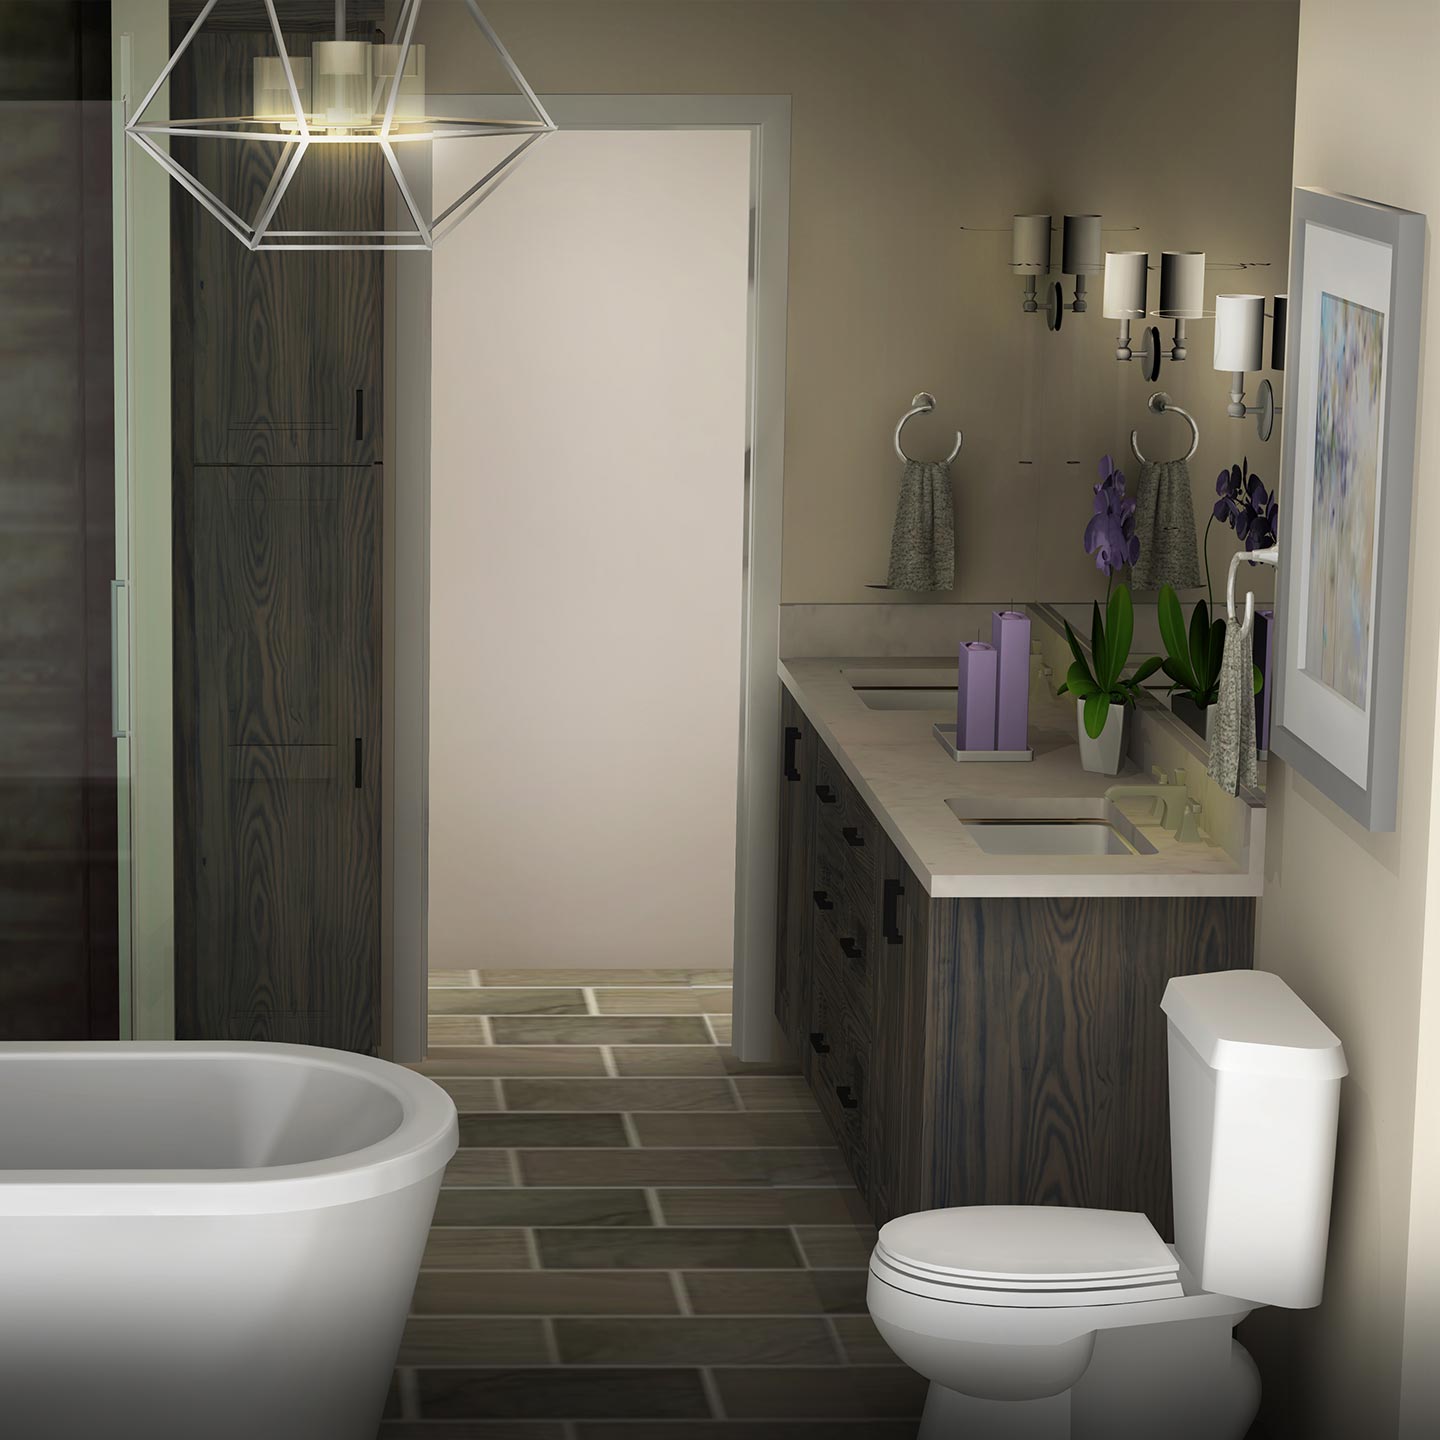 Bathroom Design by Laura Giampaolo